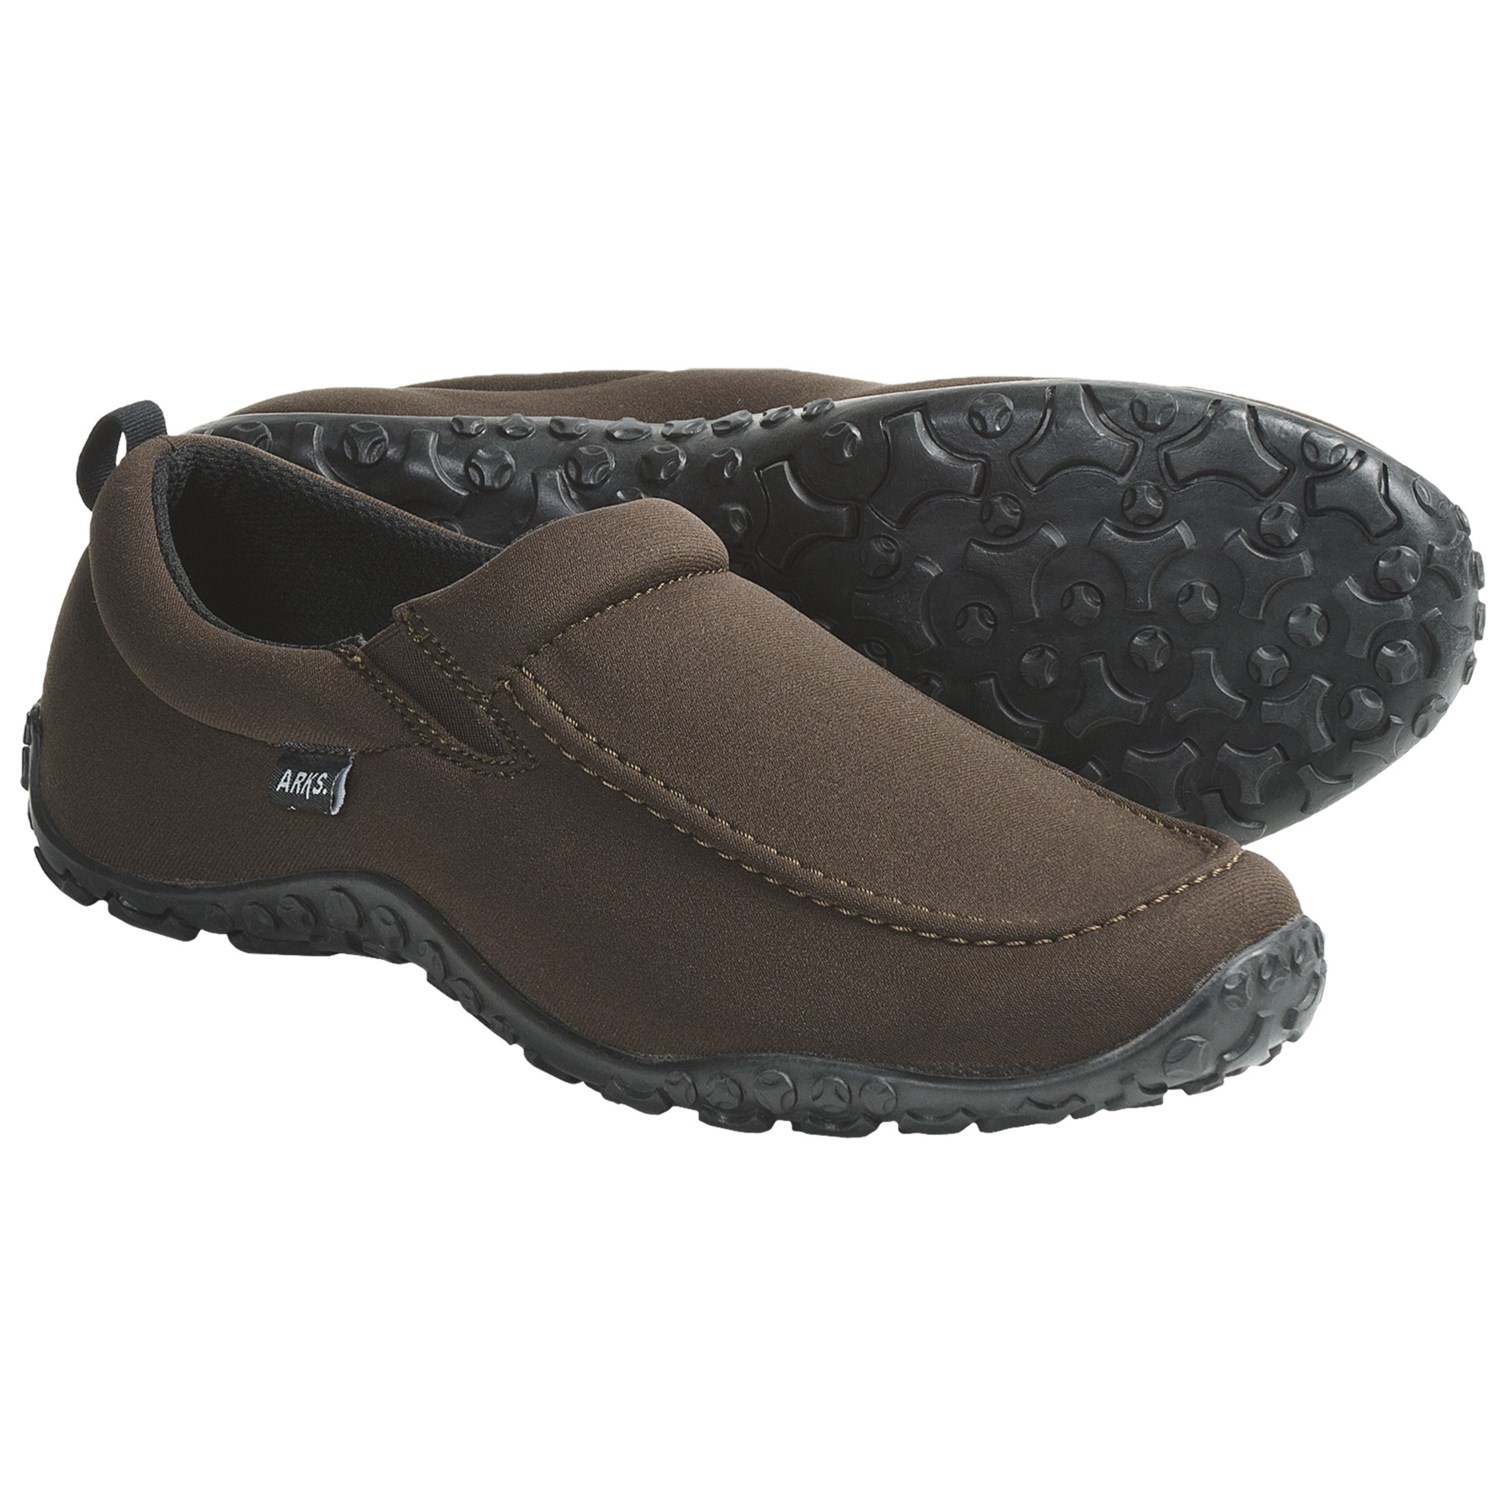 Arks Outdoors Camp Moc Shoes (For Men) 4756G - Save 37%